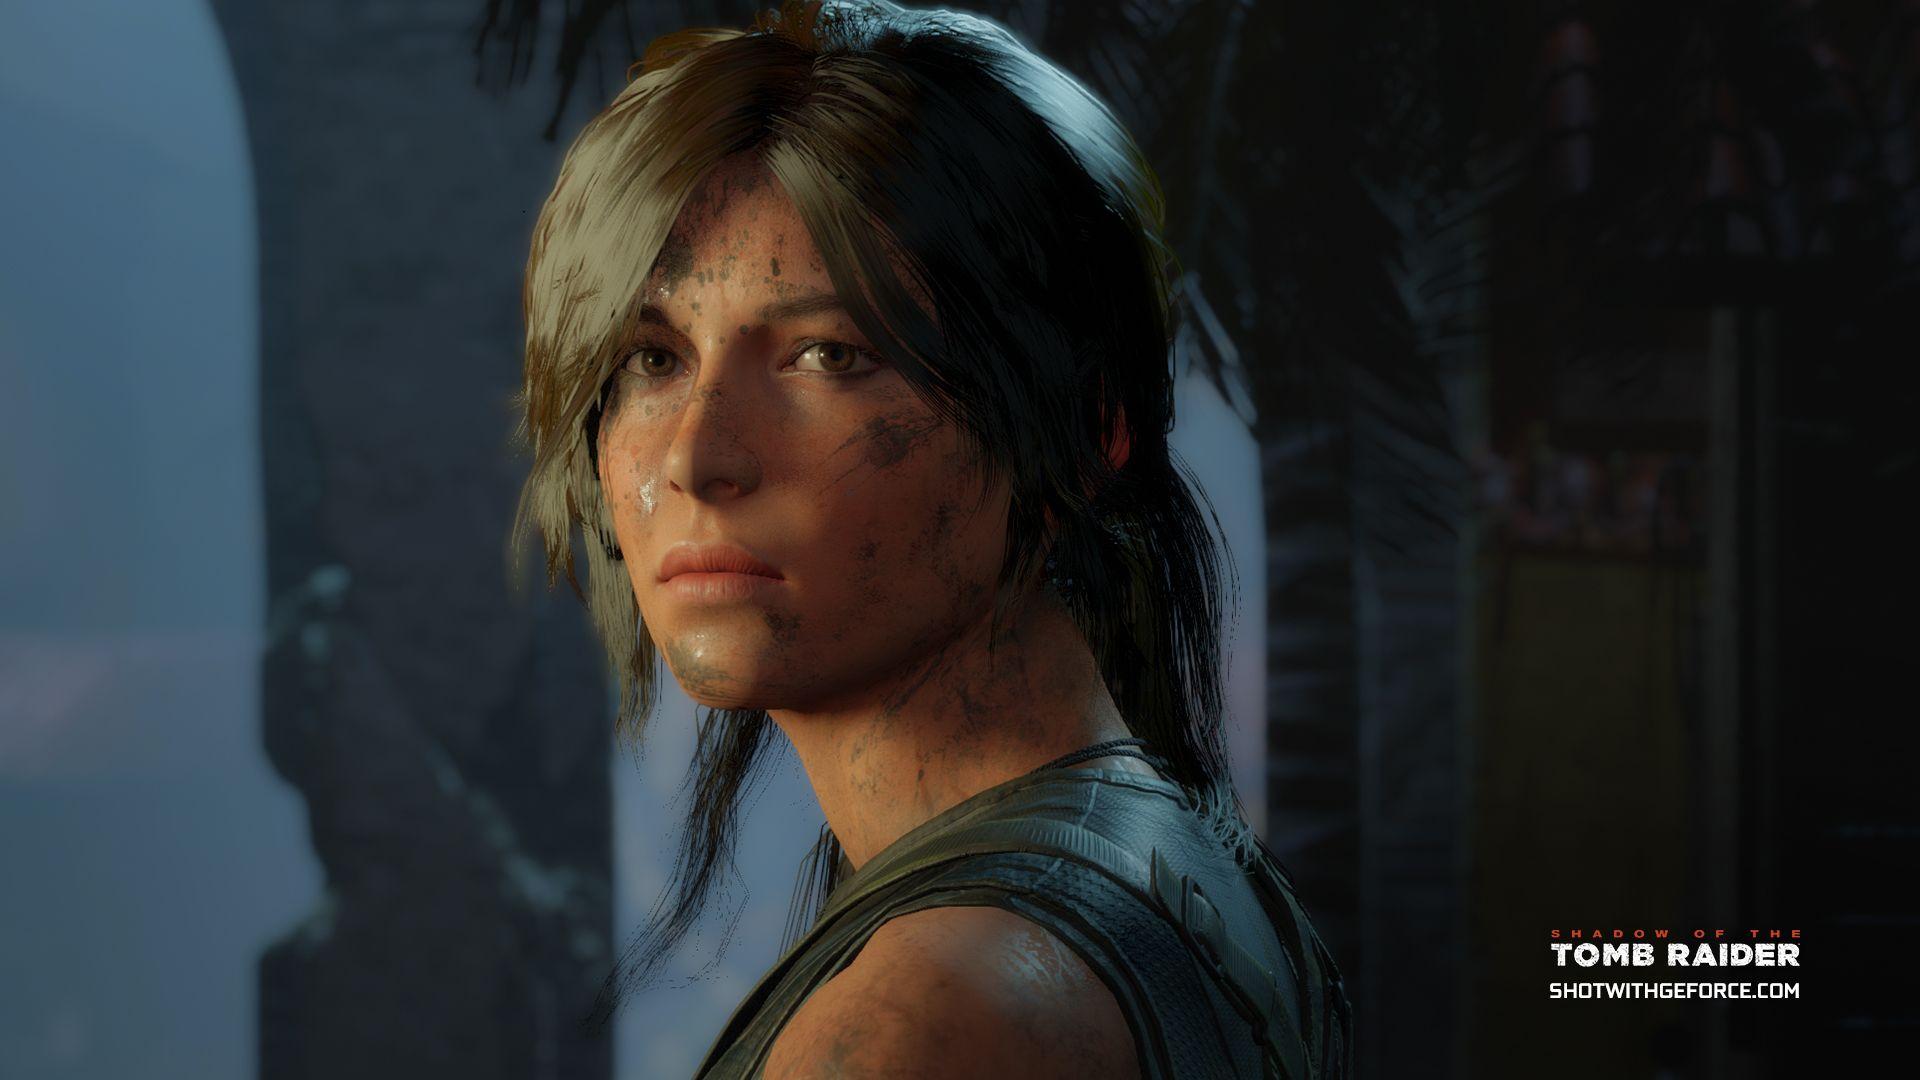 Shadow of the Tomb Raider will show a lighter side of Lara Croft